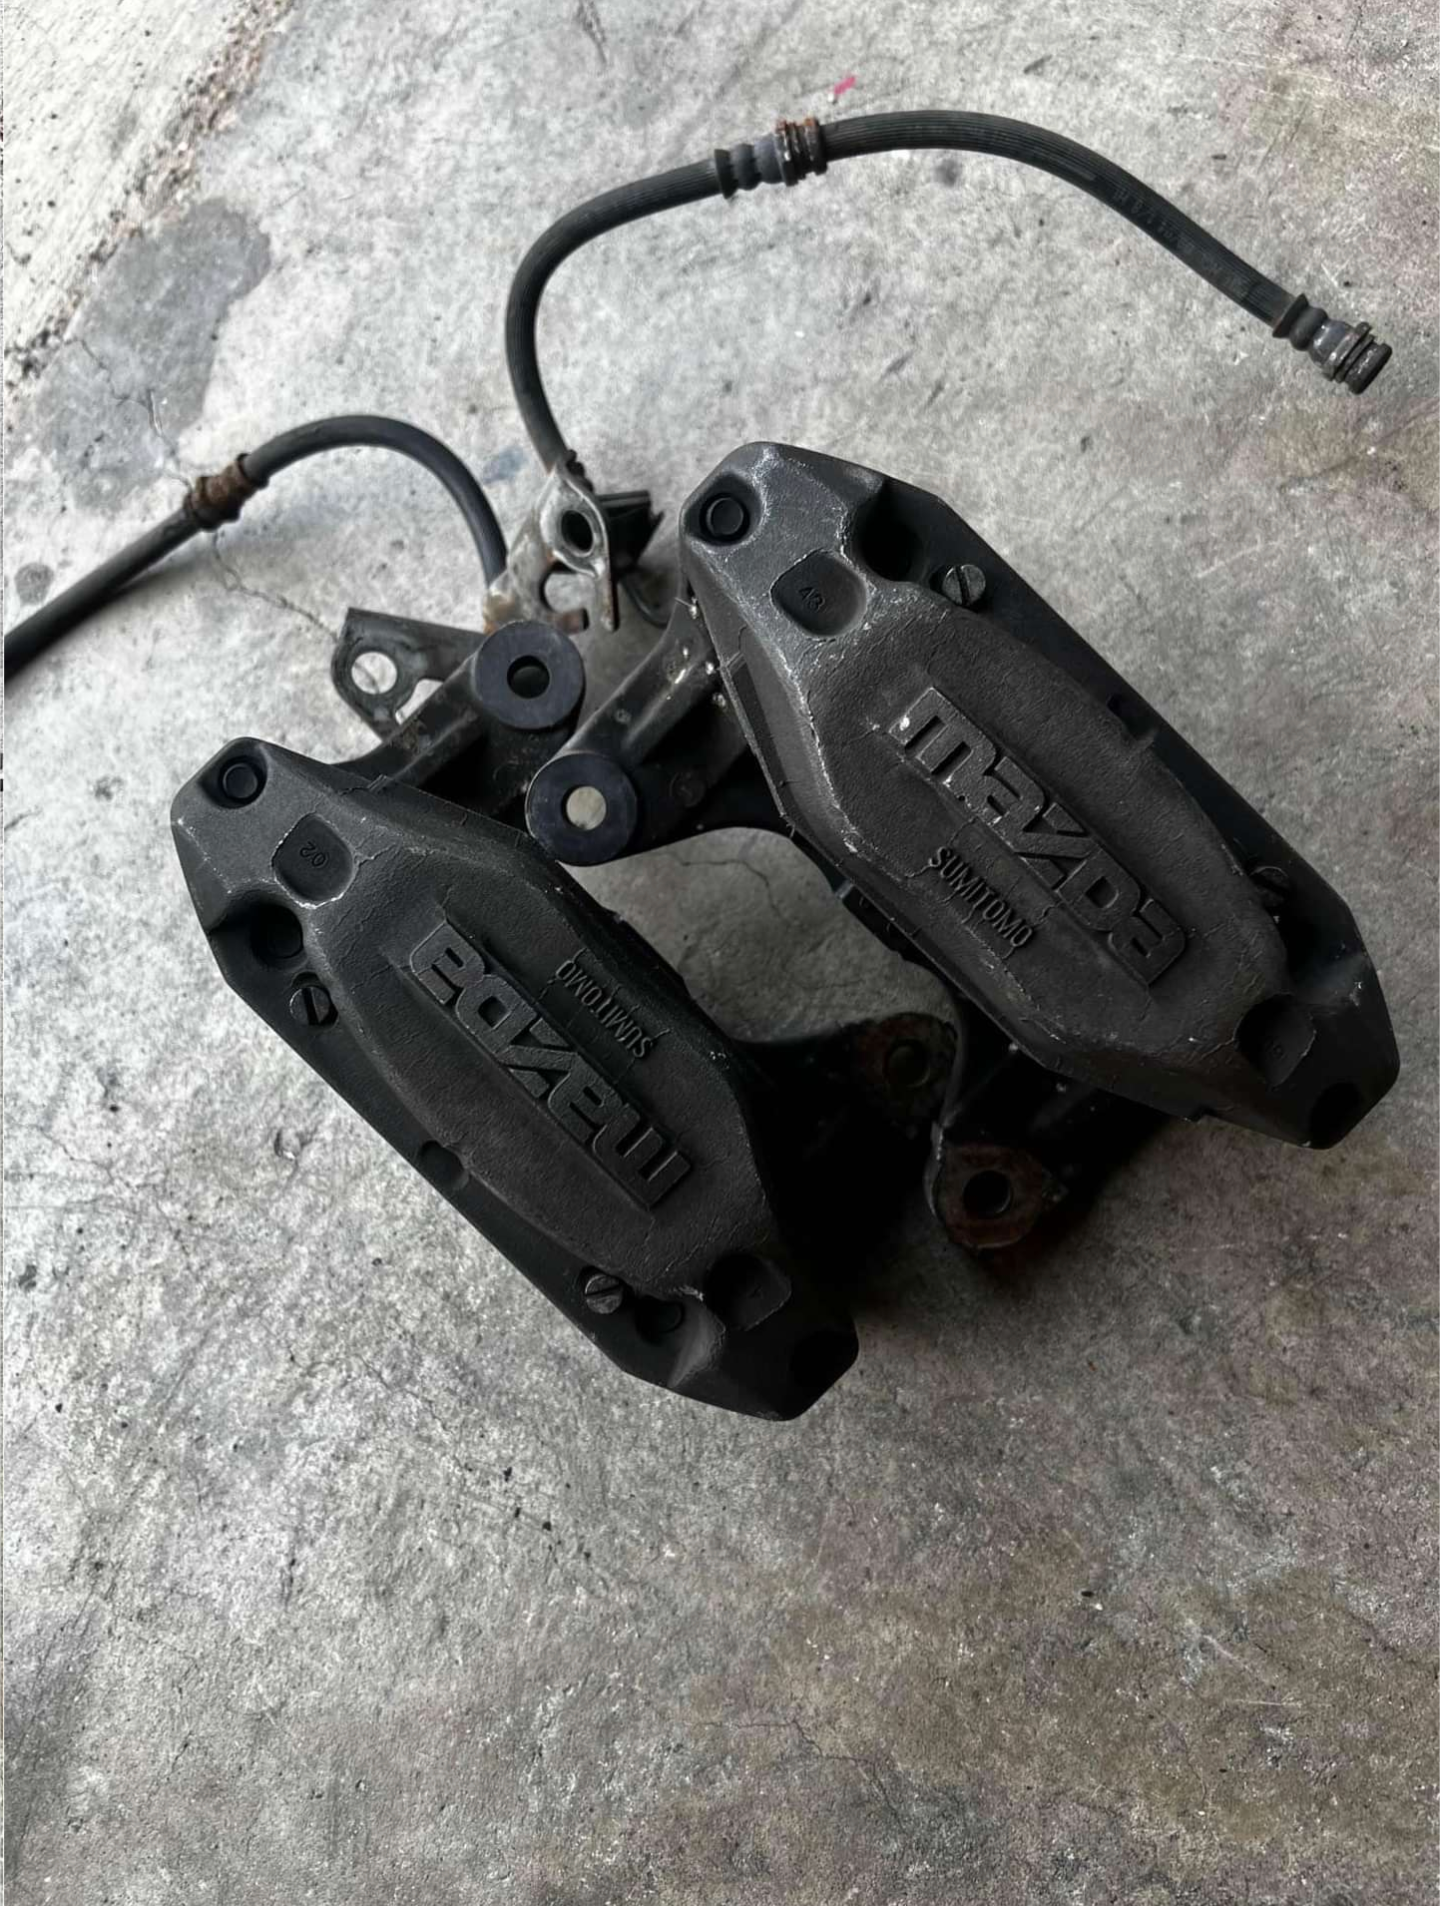 Brakes - RX7 FD 99 Spec/RZ/RS 17" Calipers - Used - 0  All Models - Sugarland, TX 77498, United States